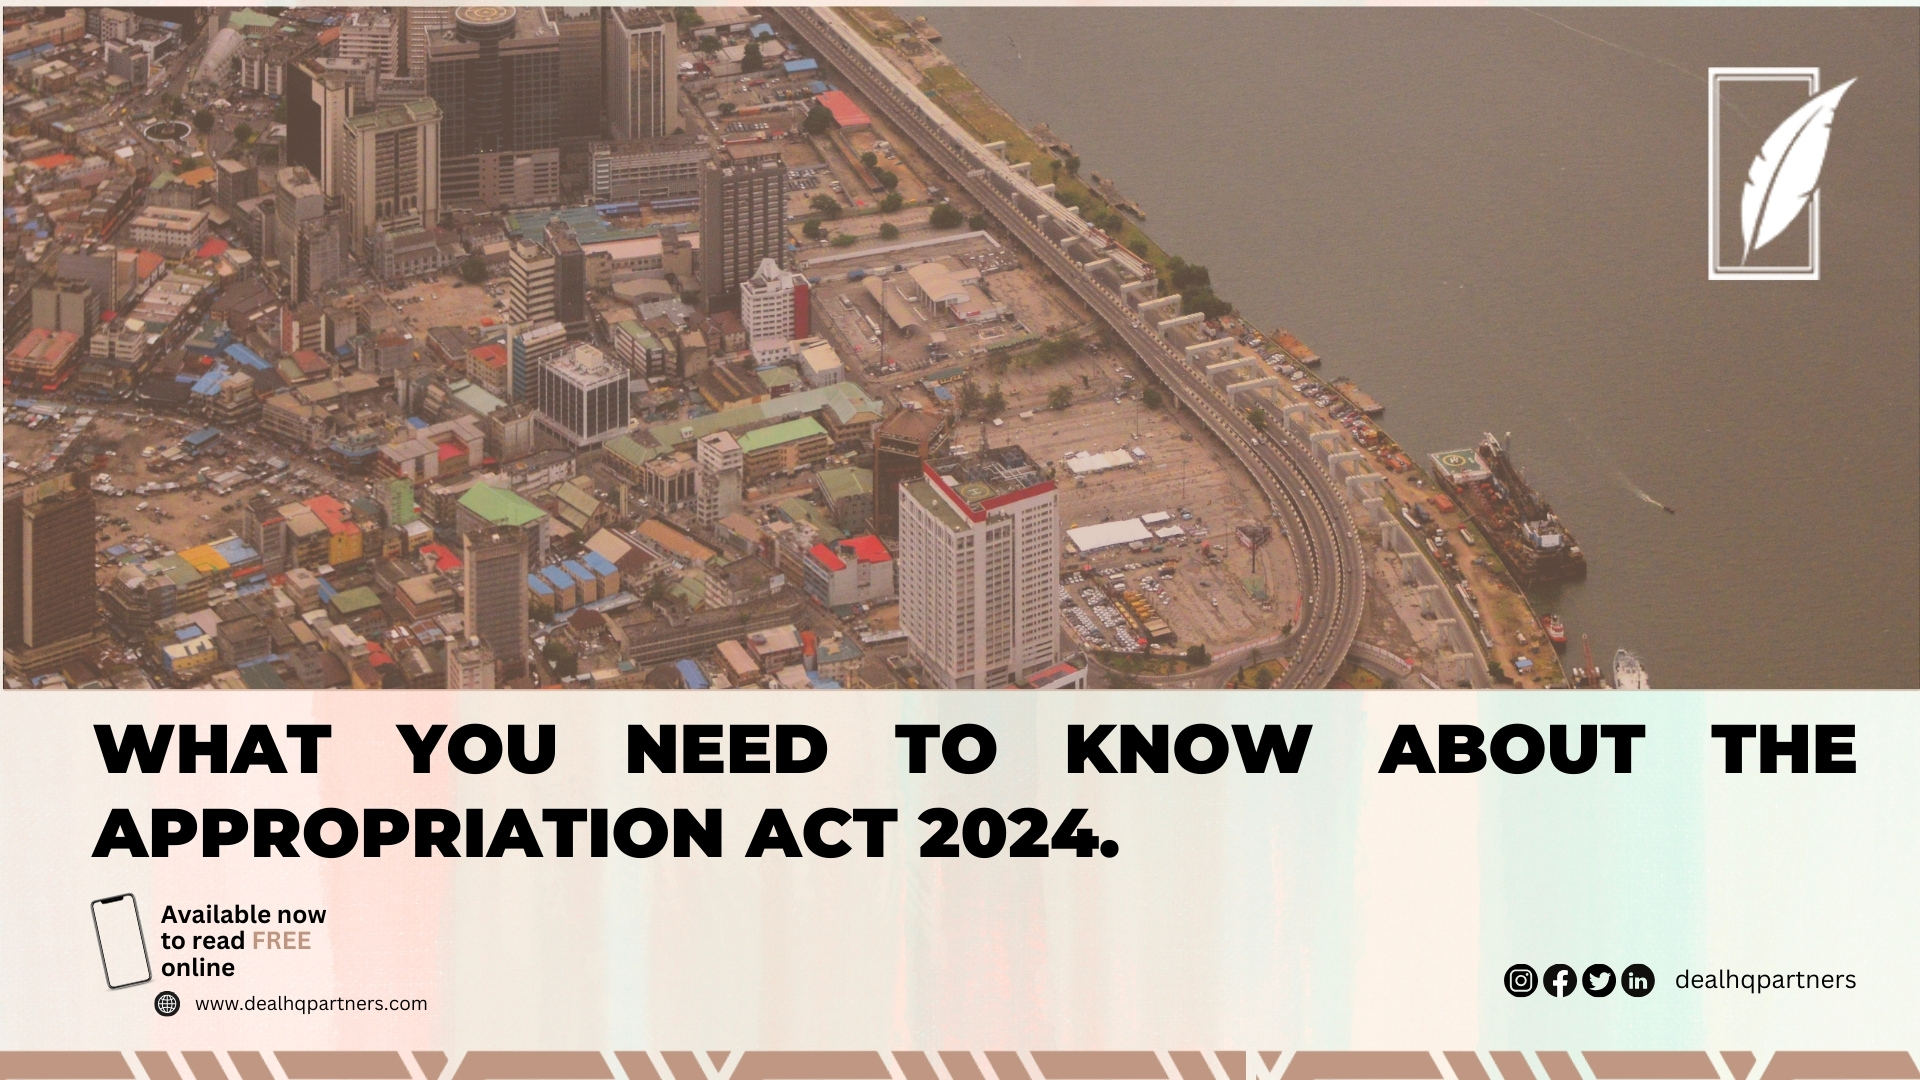 WHAT YOU NEED TO KNOW ABOUT THE APPROPRIATION ACT 2024